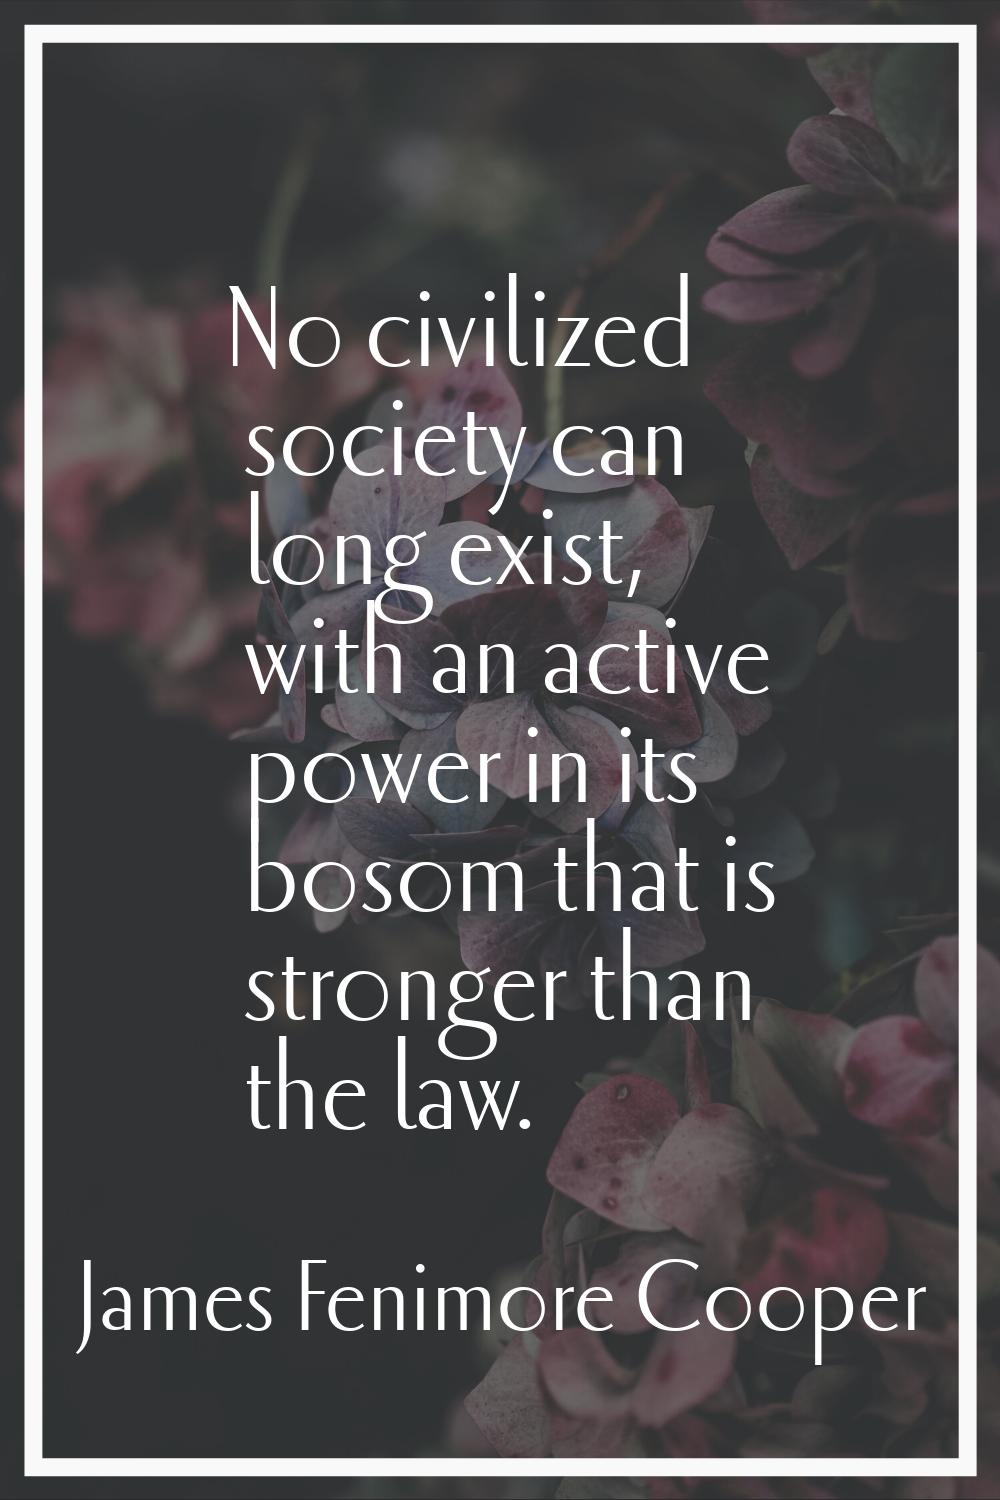 No civilized society can long exist, with an active power in its bosom that is stronger than the la